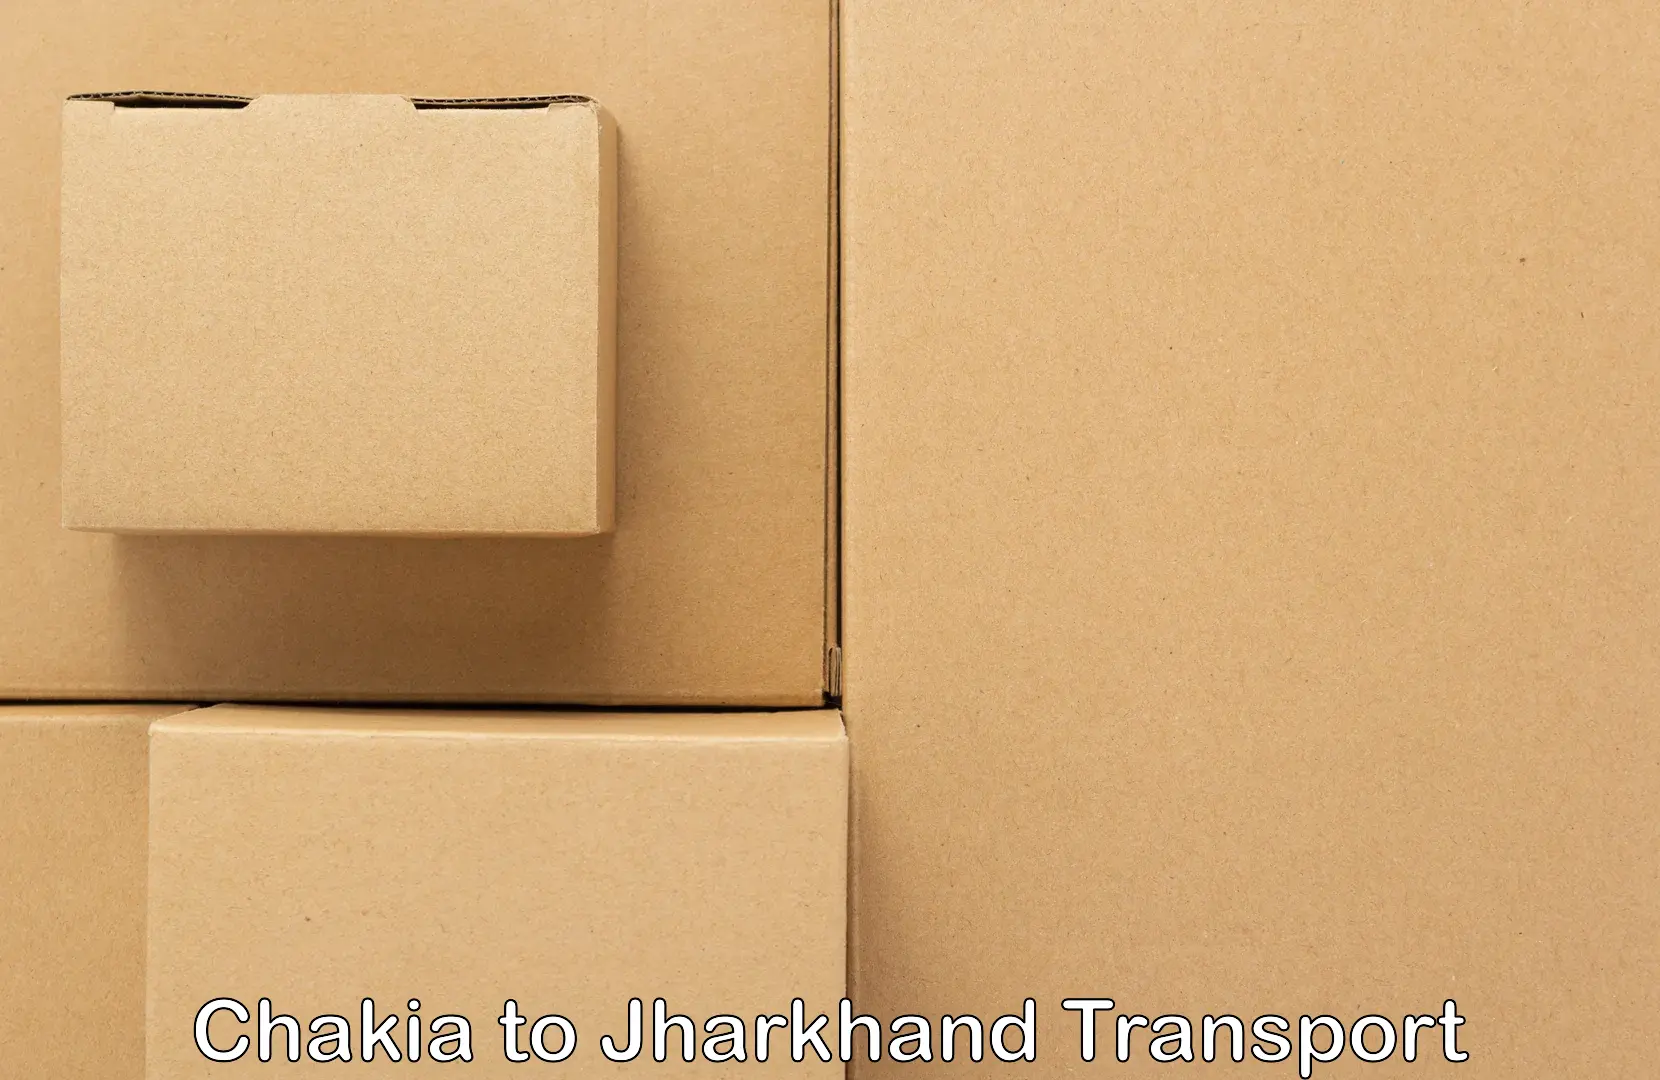 Truck transport companies in India Chakia to Ranchi